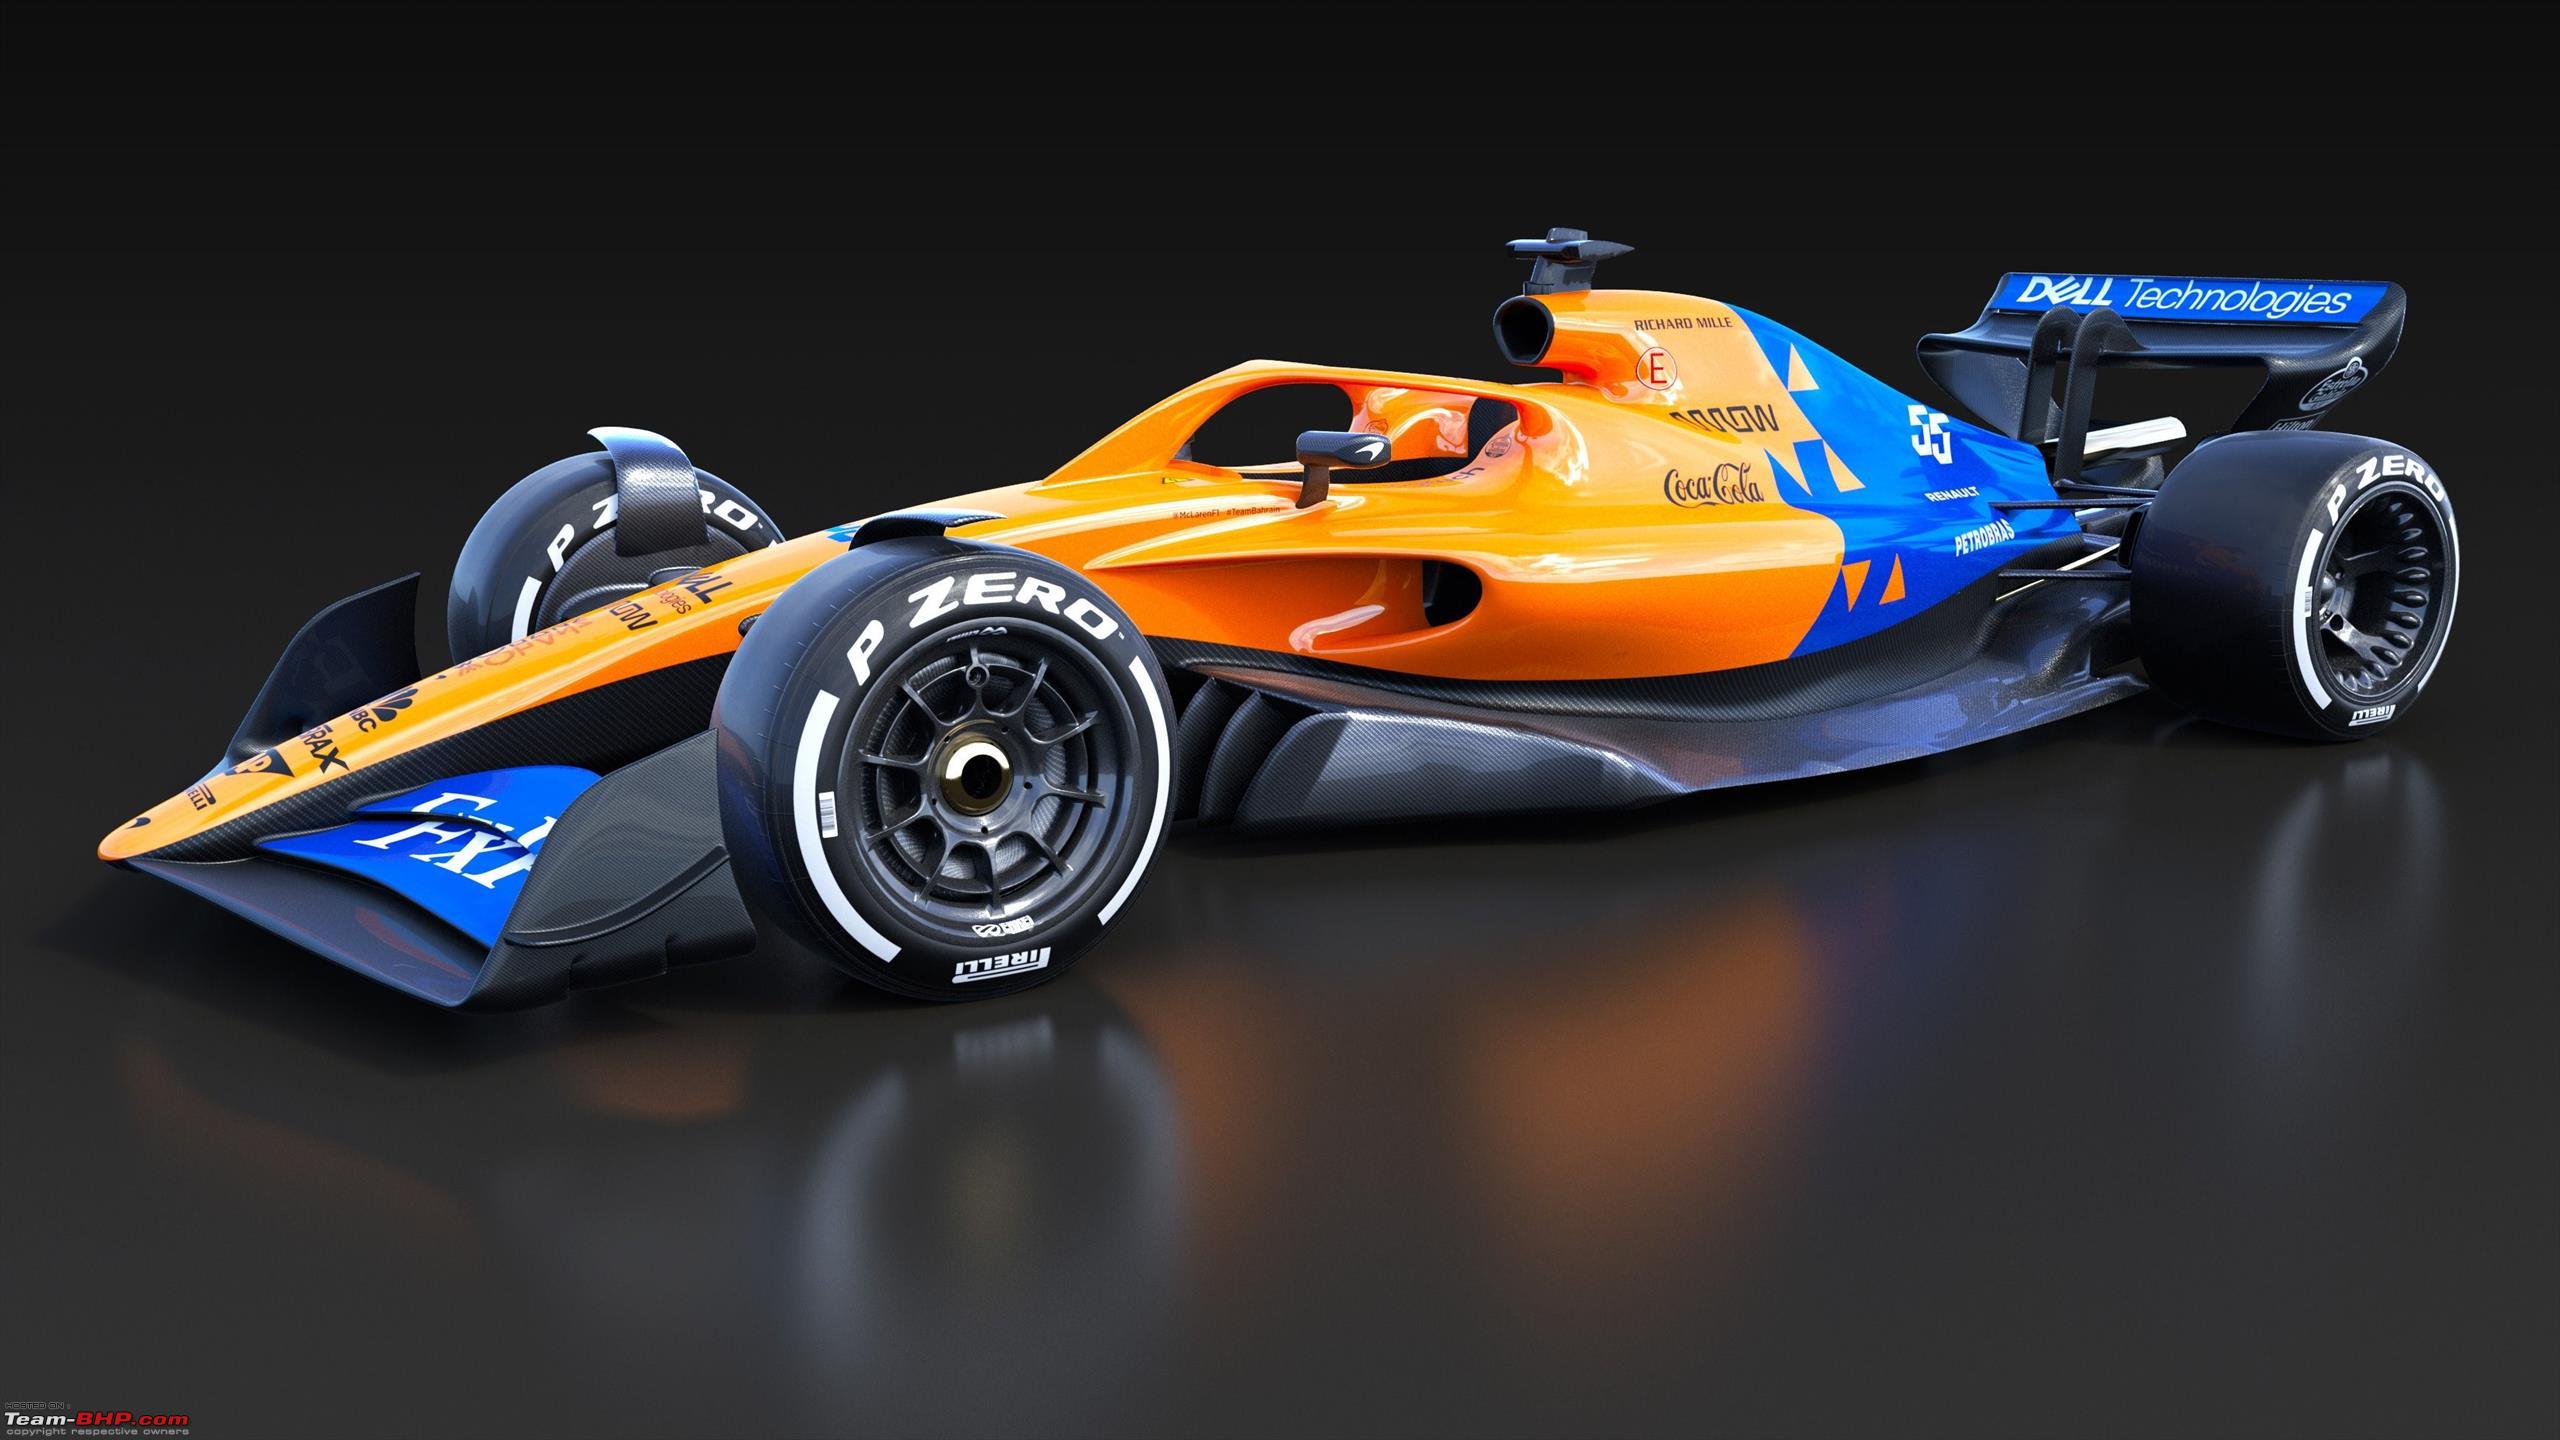 Here's a first look at the 2022 F1 car; could be official unveiled at